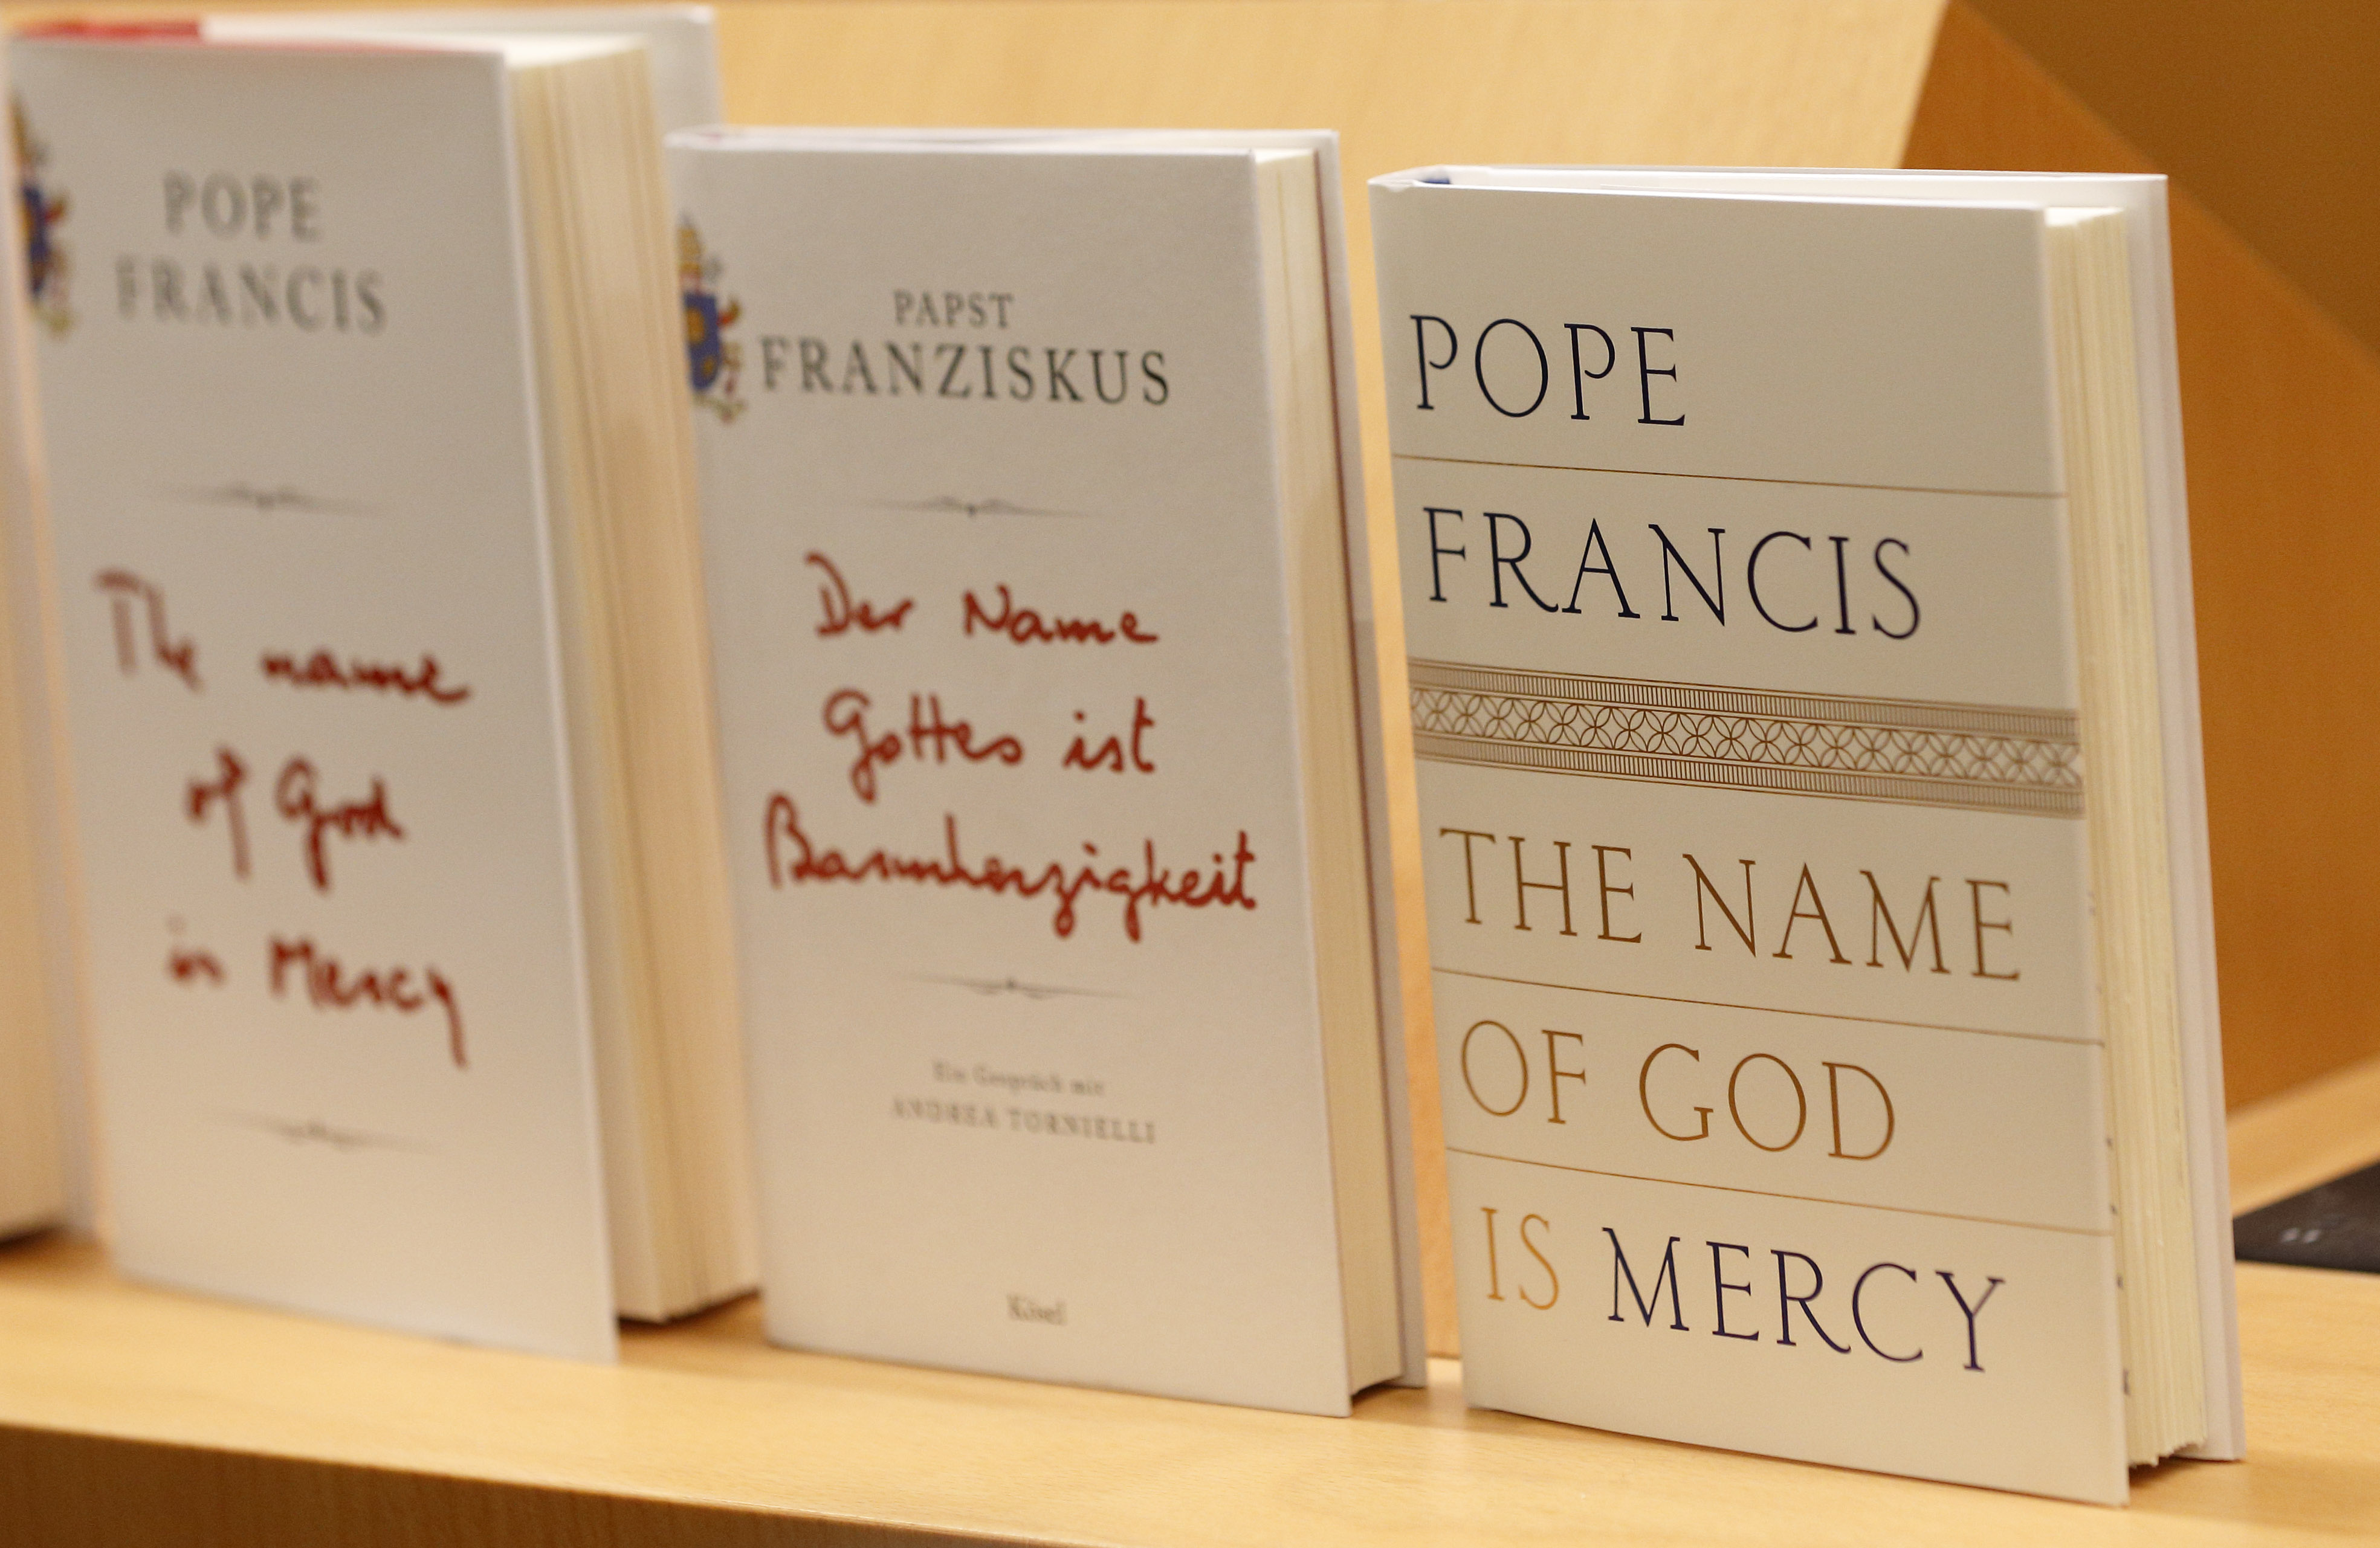 The English and German editions of "The Name of God Is Mercy" are pictured in Rome Jan. 12. (CNS/Paul Haring)